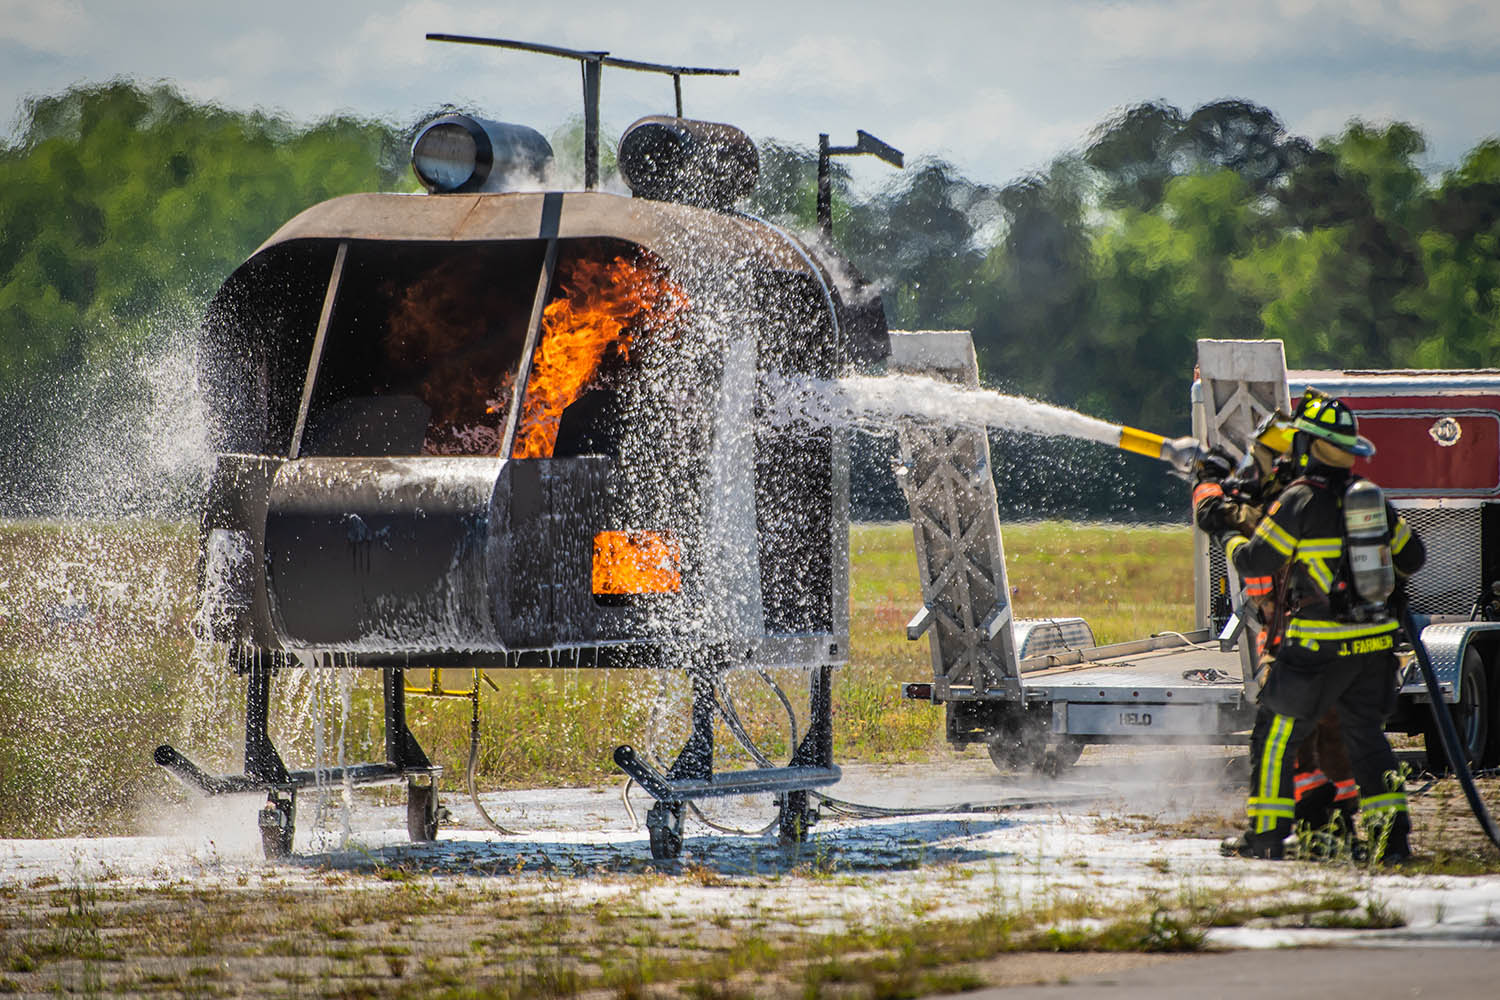 Auburn aviation disaster driller hosing down a helicopter on fire